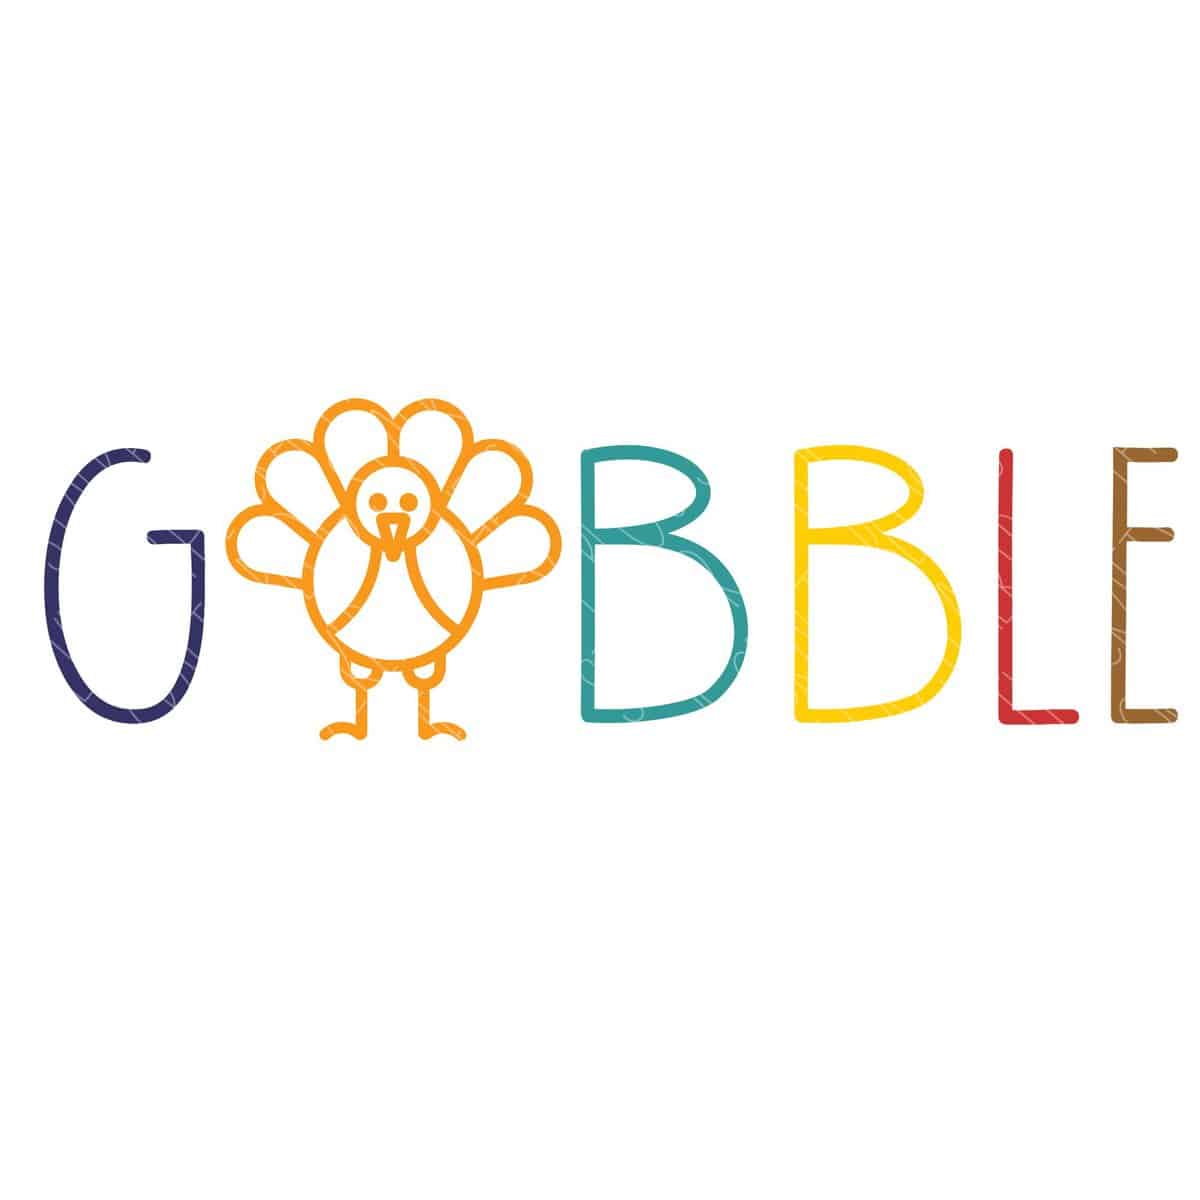 Layered SVG Cut File: Gobble with a turkey outline as the O.